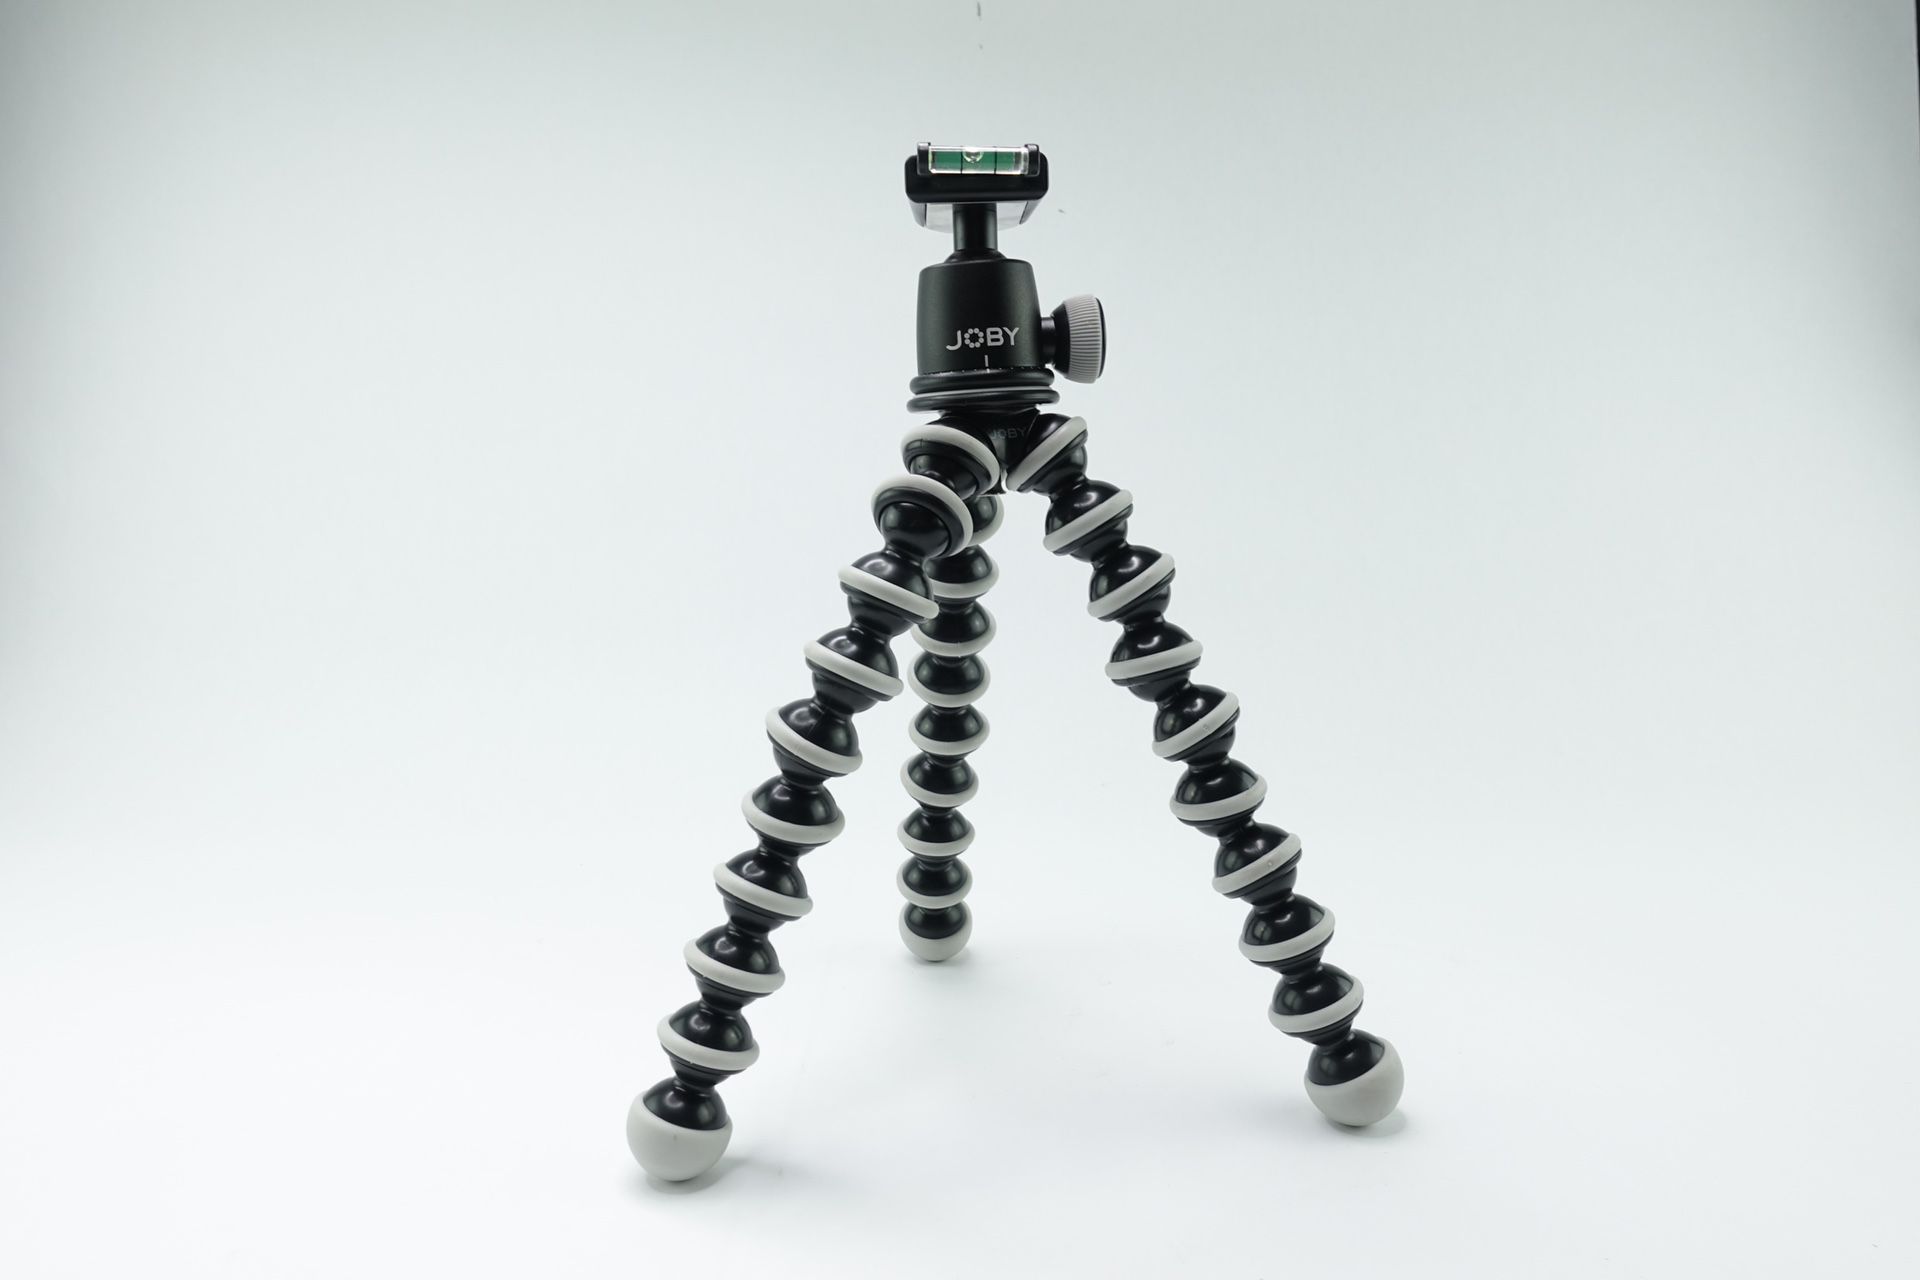 JOBY GorillaPod SLR Zoom - Flexible Tripod with Ballhead Bundle for DSLR or Mirrorless Cameras up to 6.6lbs